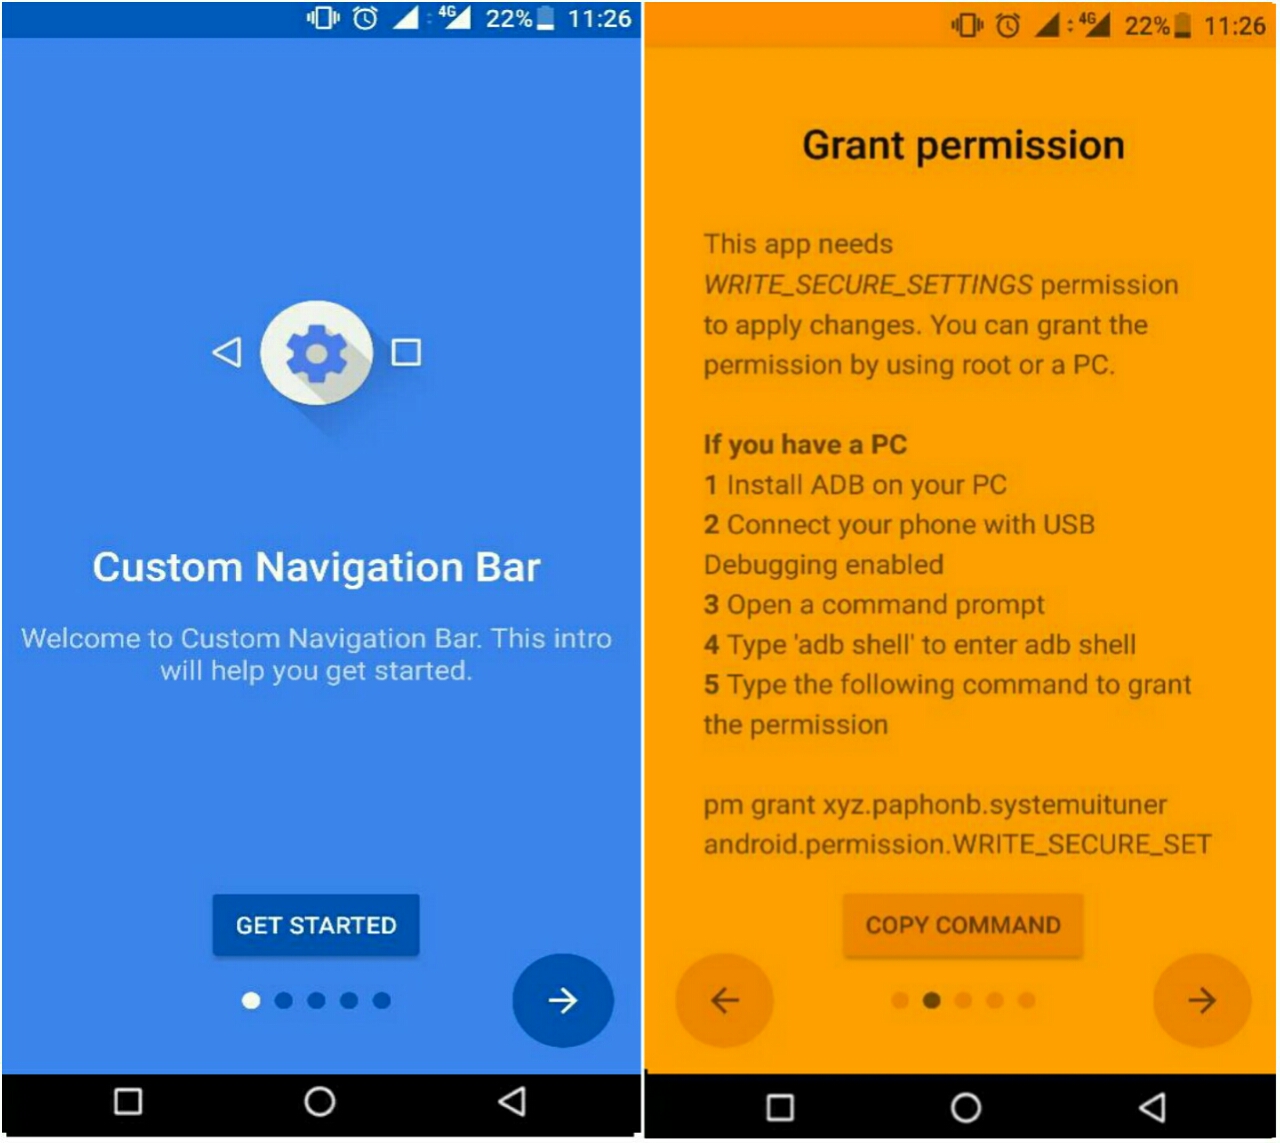 Adb grant permission. Navigation Bar Android. App navigation Bar. Custom navigation Bar. ADB Shell PM Grant com.Draco.Resolution Changer Android.permission.write_secure_settings.